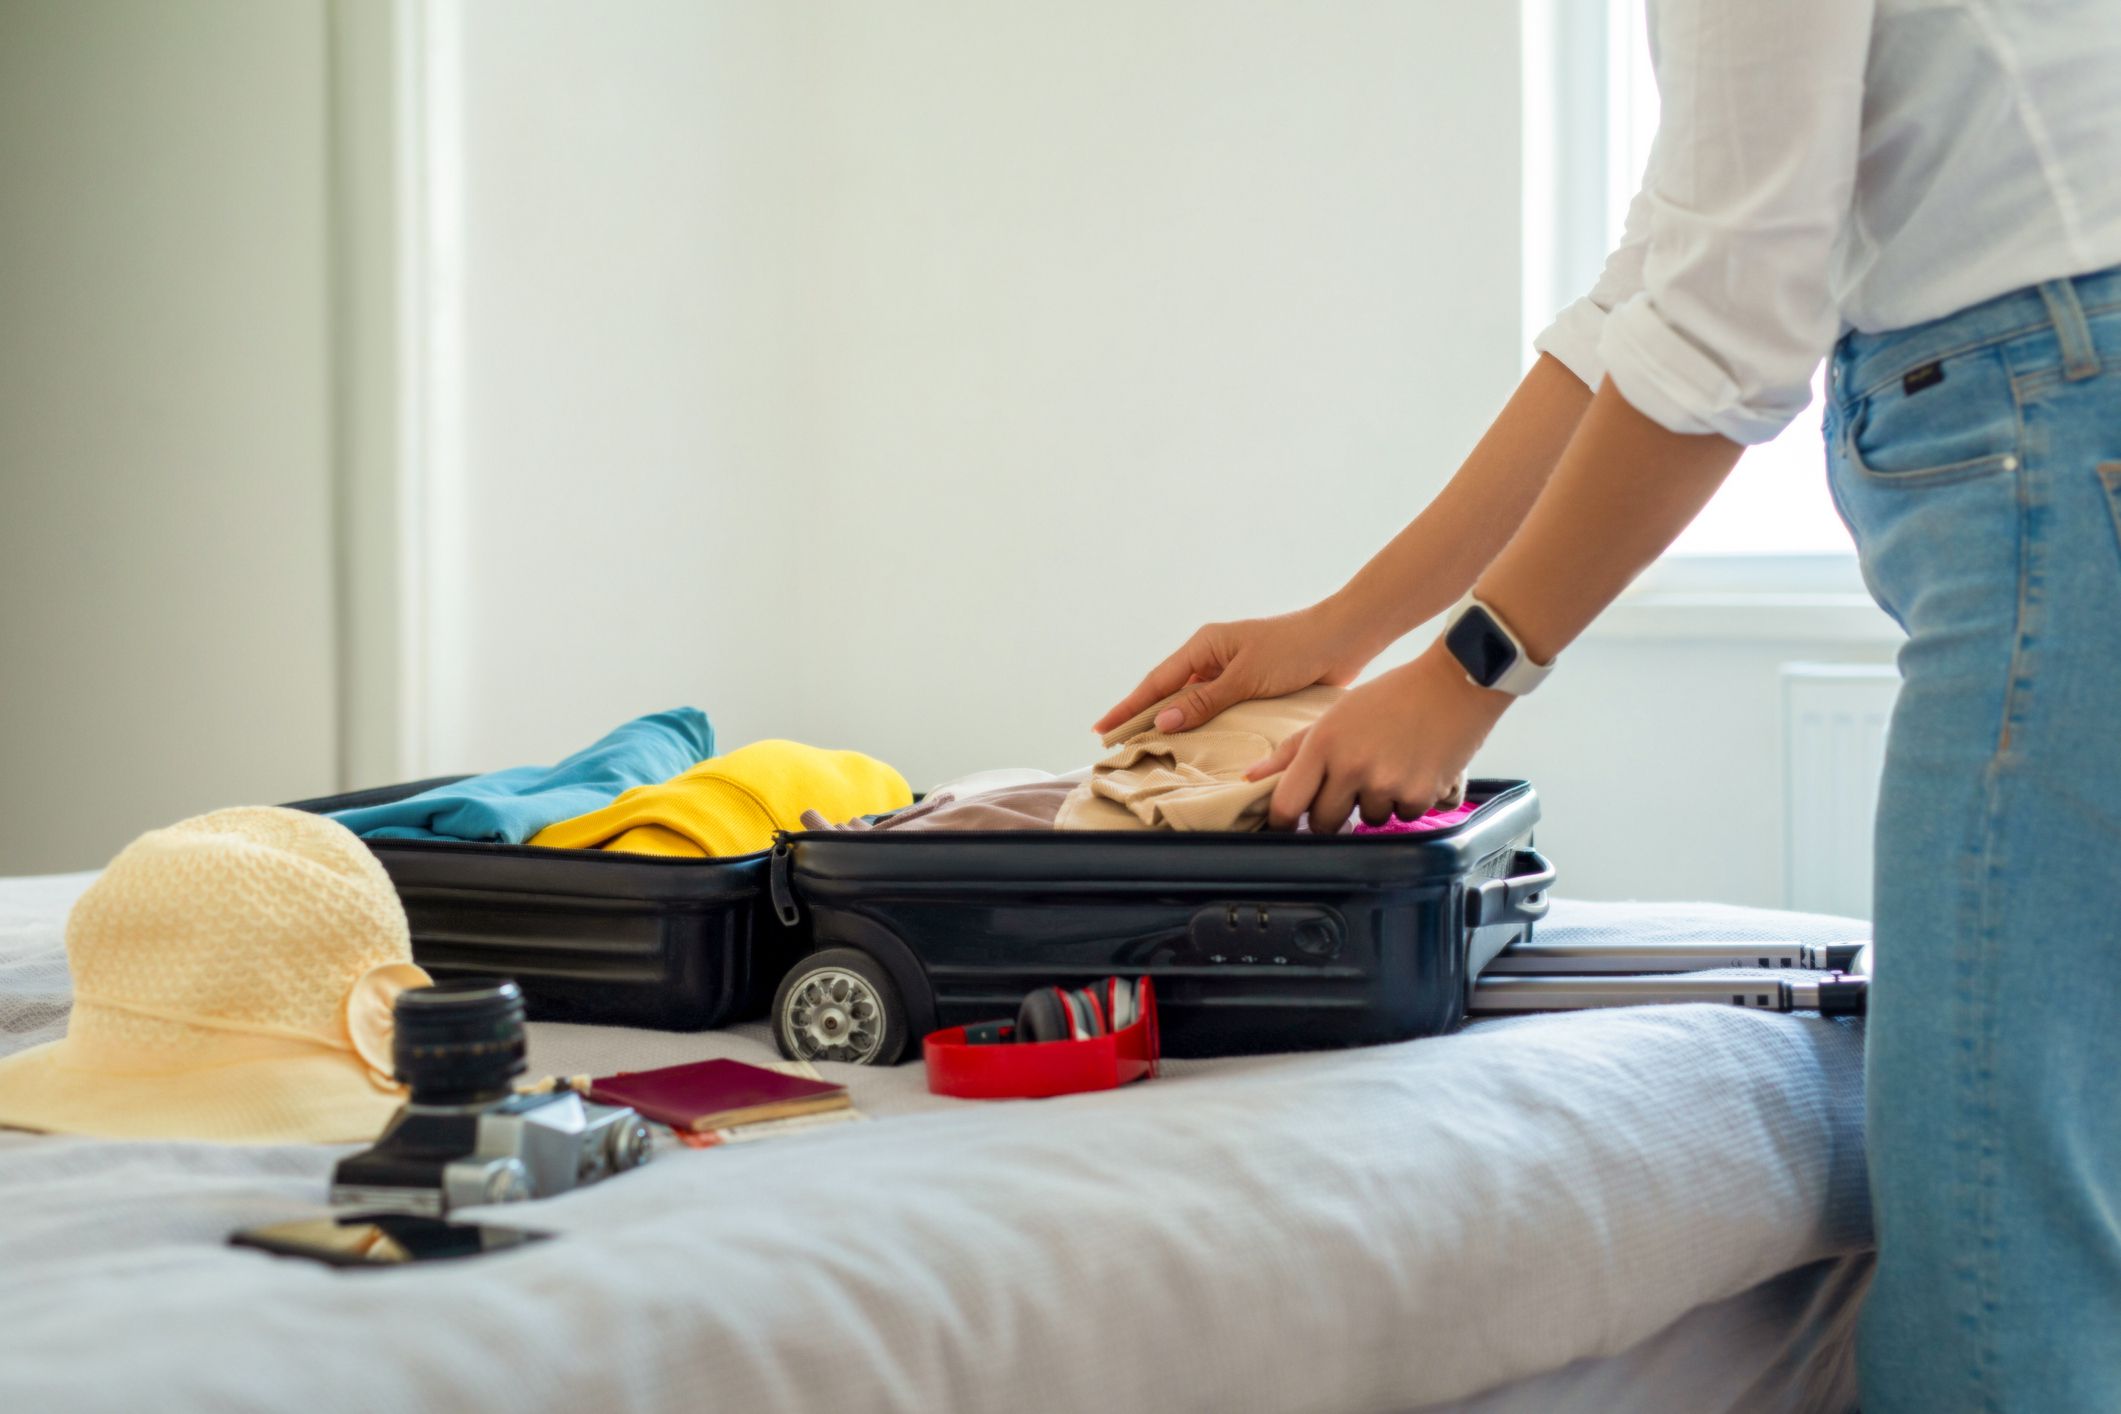 <p>Cruise ships are basically moving hotels. Just because you checked in your luggage early does not mean it’ll be waiting in your cabin as soon as you board. So if you have essential medications, or need something specific for your first day of cruising, it's best to keep it handy with you.</p>